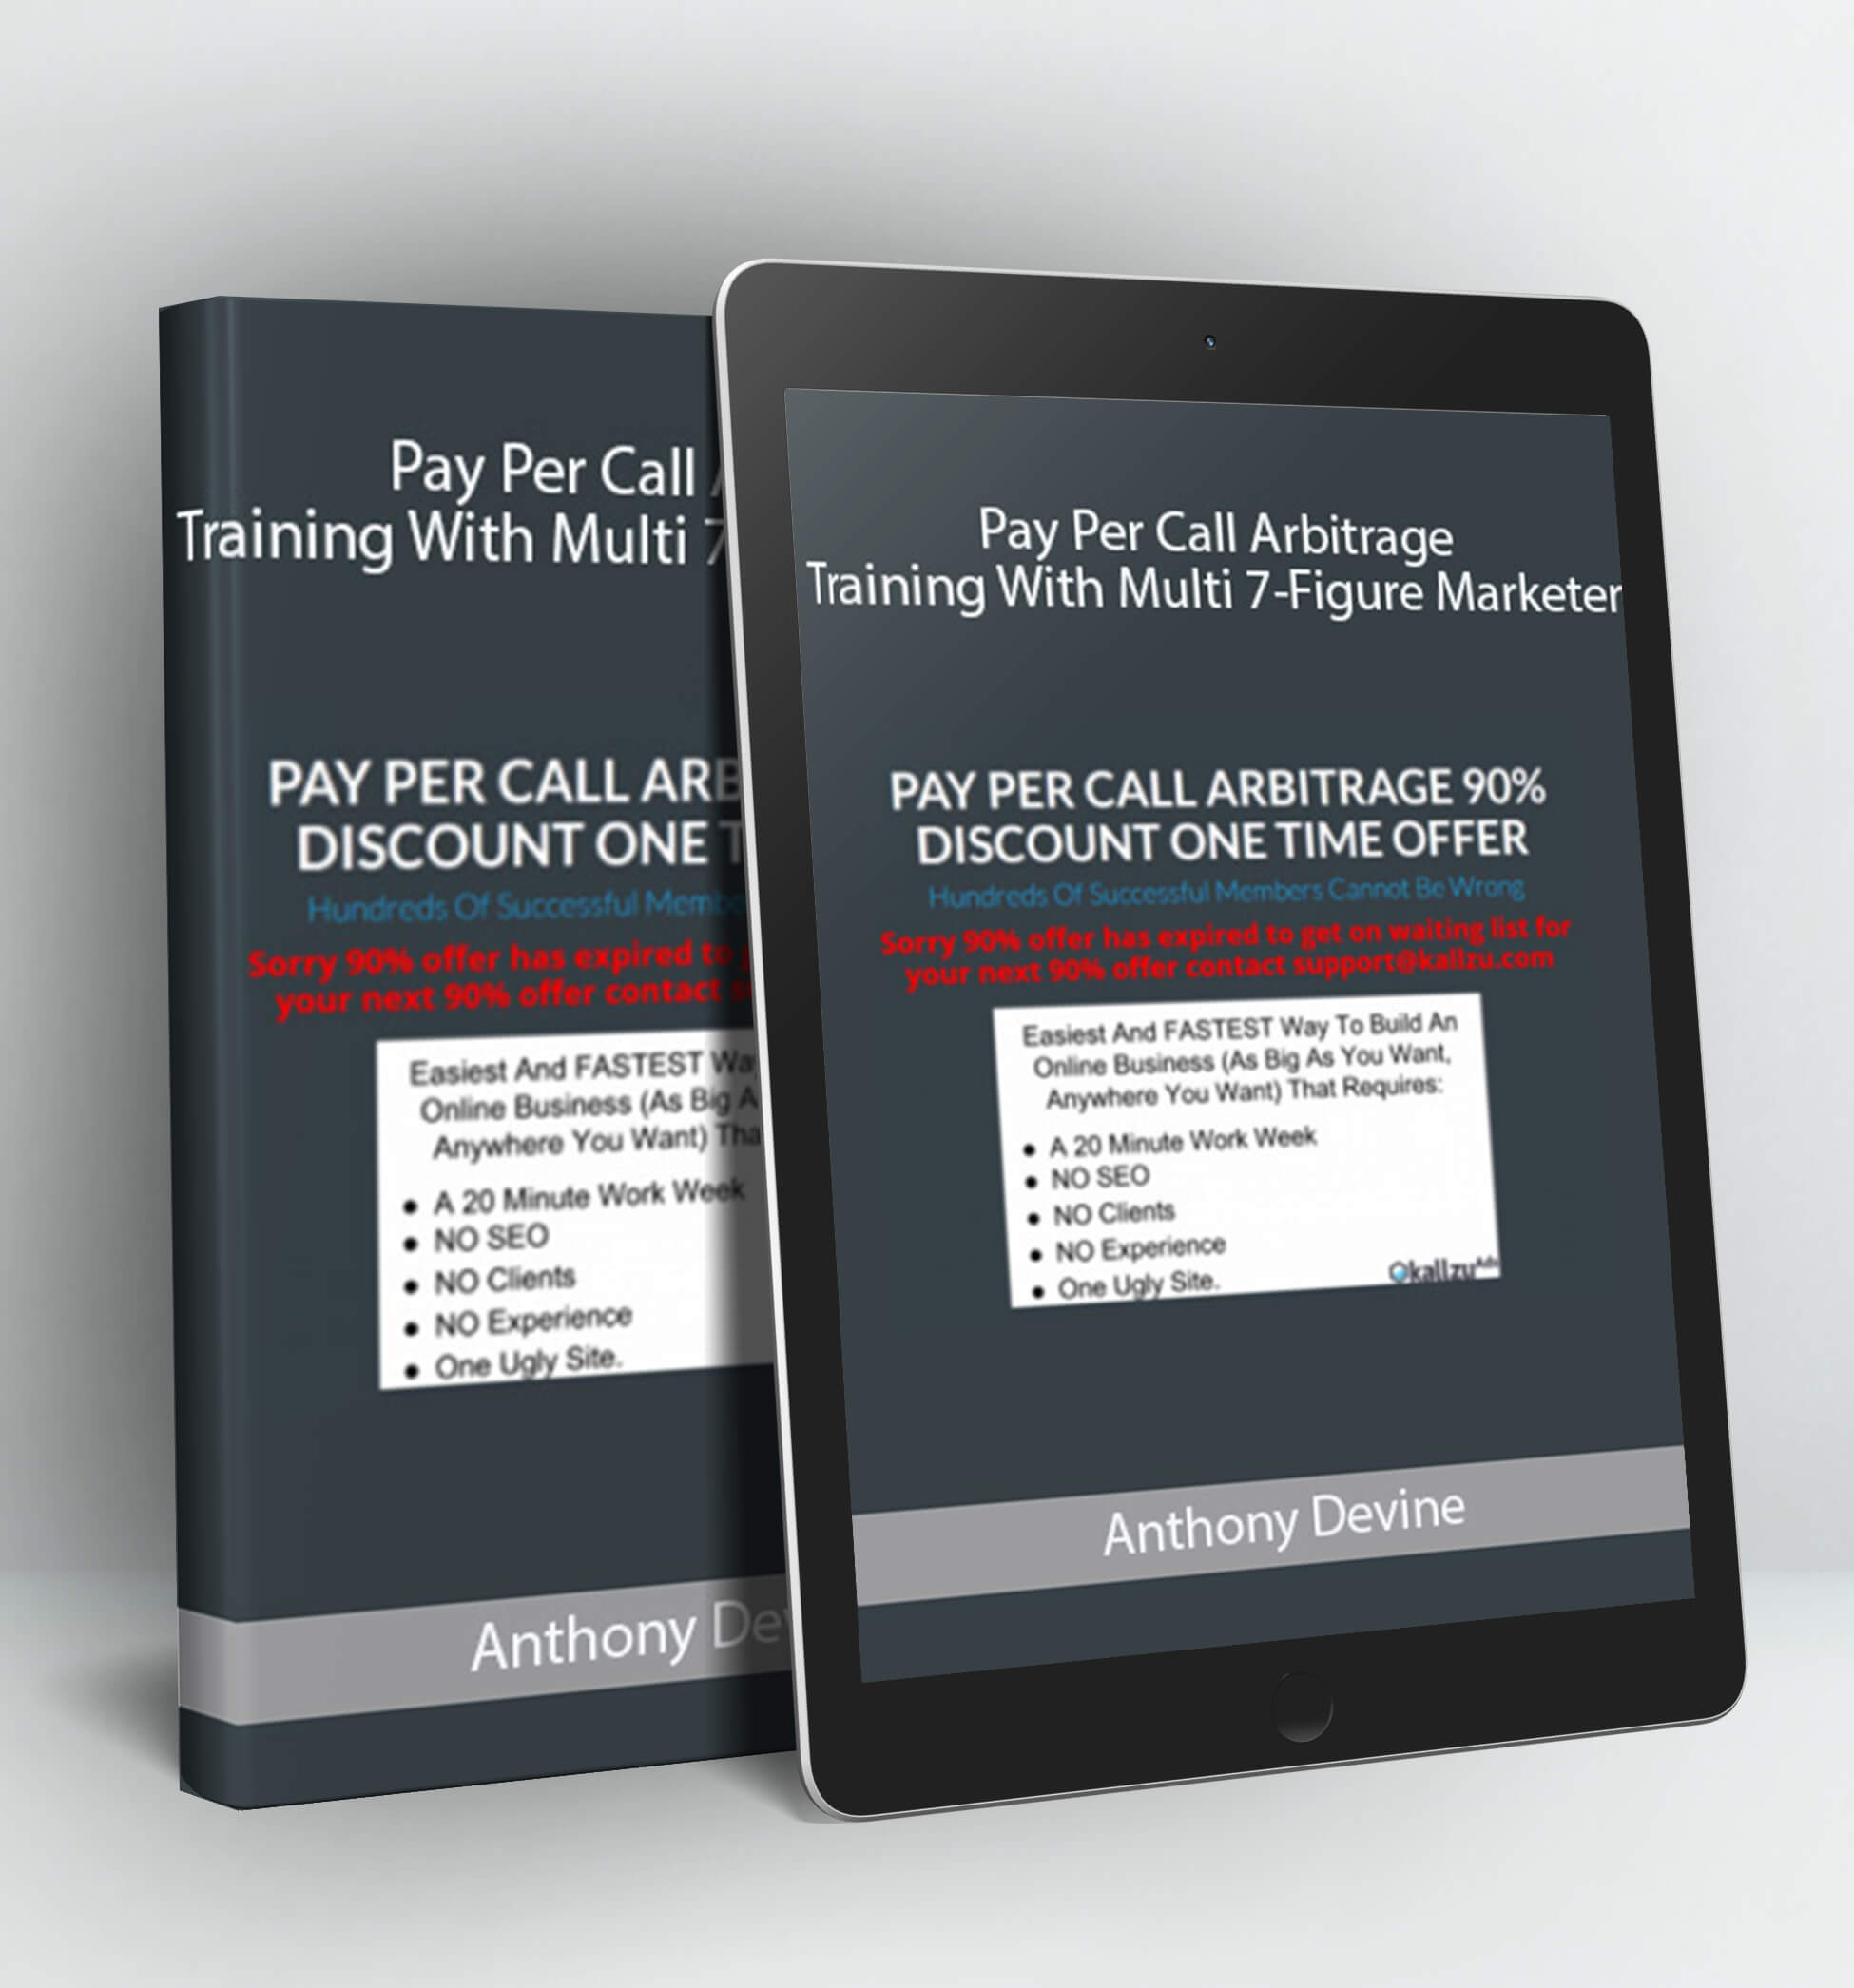 Pay Per Call Arbitrage Training With Multi 7-Figure Marketer - Anthony Devine